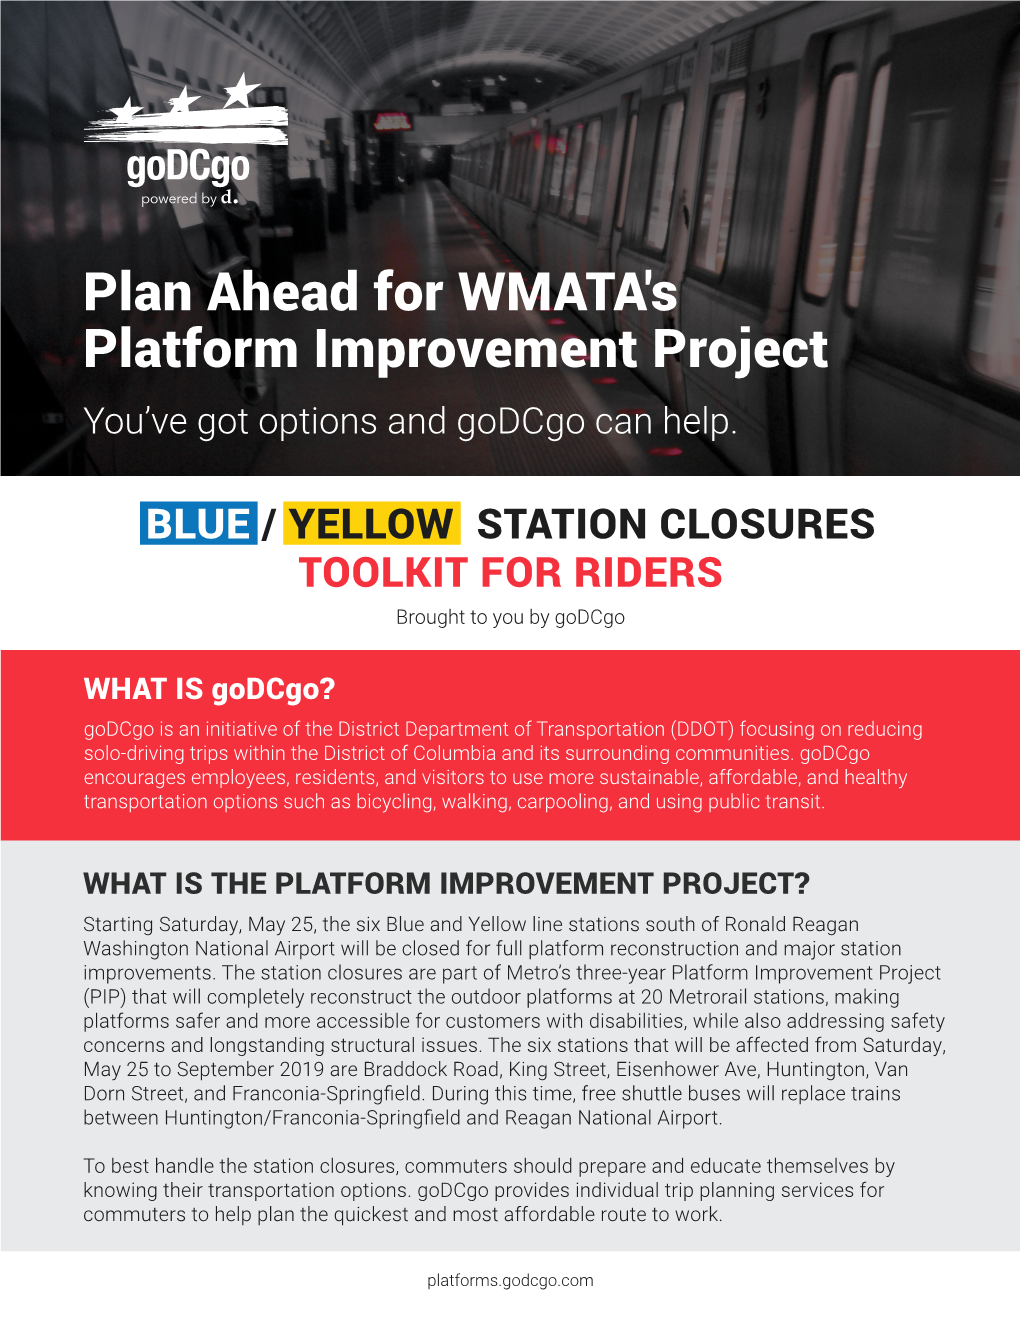 Plan Ahead for WMATA's Platform Improvement Project You’Ve Got Options and Godcgo Can Help